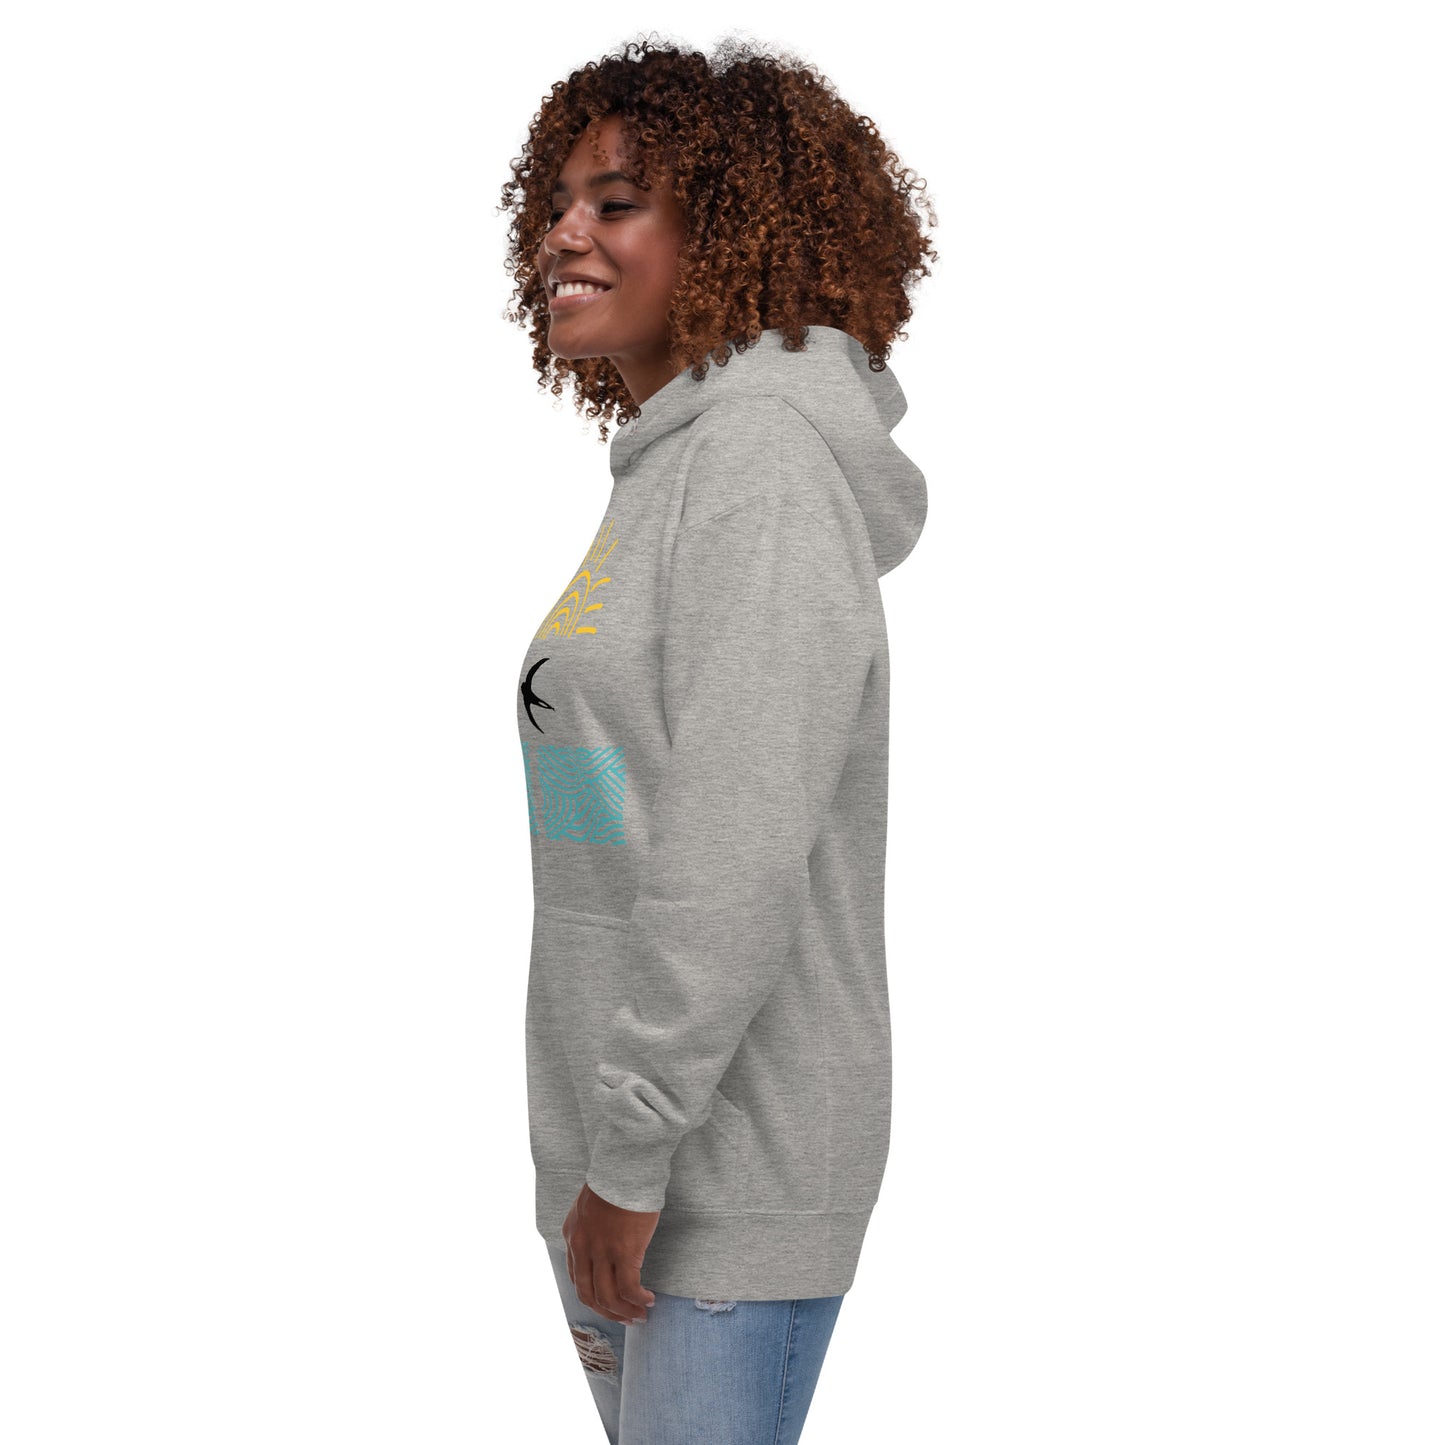 Bright Sunshine Hoodie, Fly over the Ocean by Our BoatyVerse